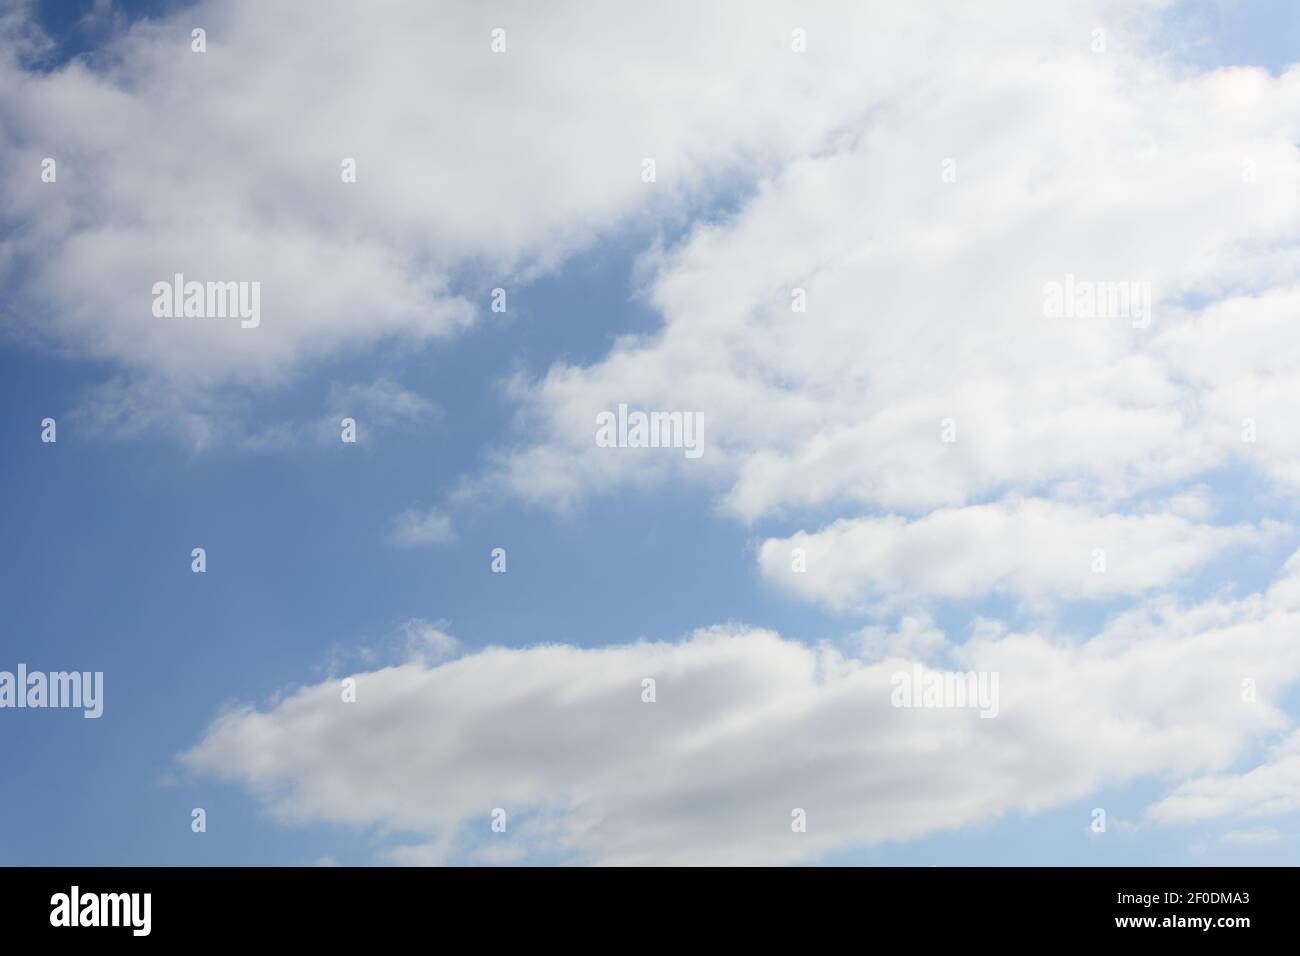 Airy white clouds against bright blue sky. Abstract background for text. Stock Photo